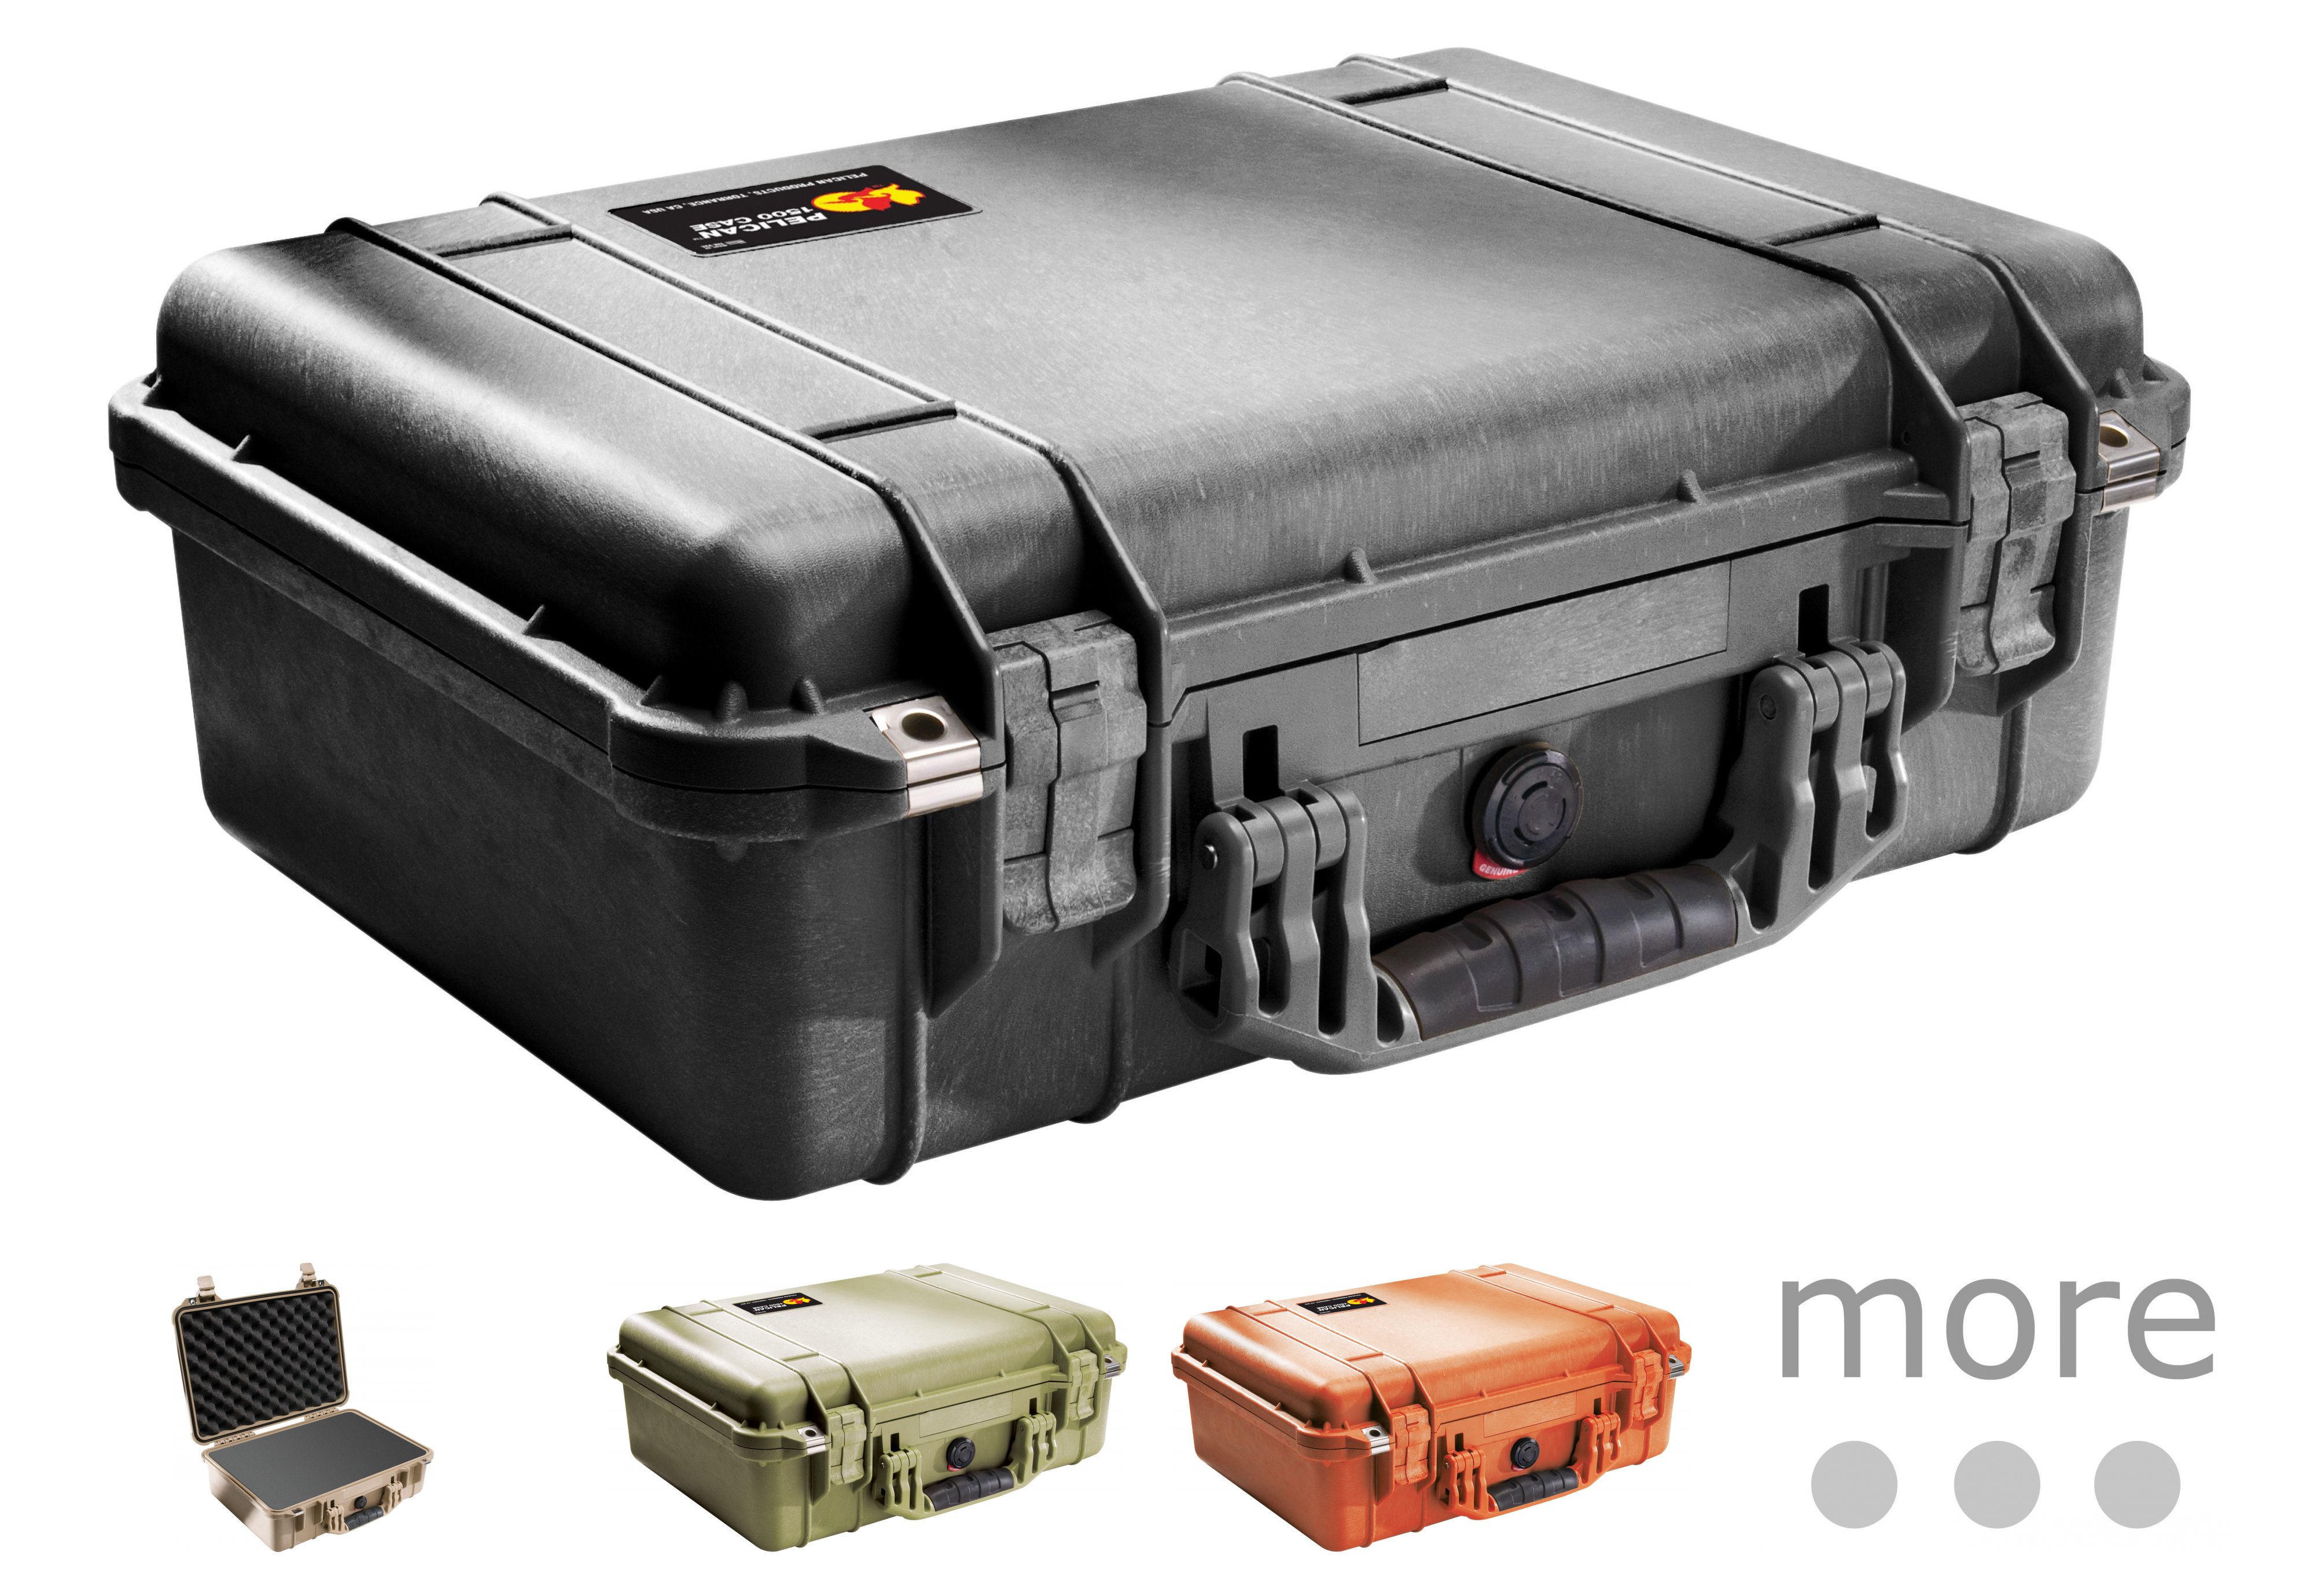 Pelican 1500 Protective Medium Hard Cases | Up to 13% Off 4.9 Star